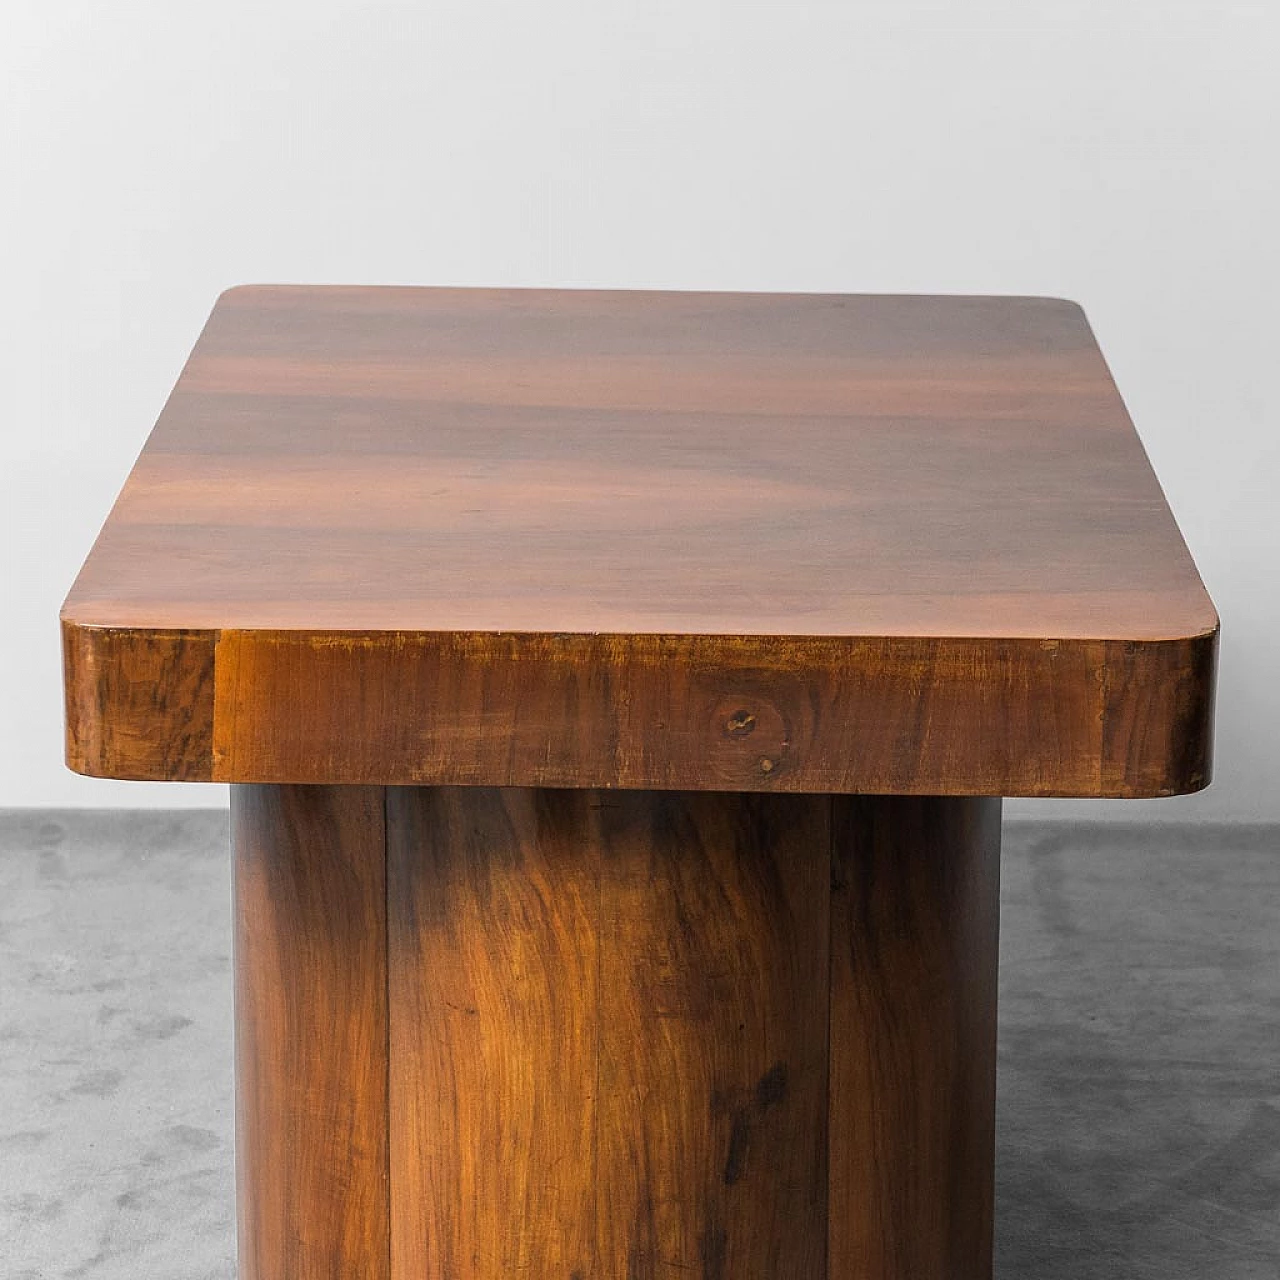 Wooden table with metal tips 2